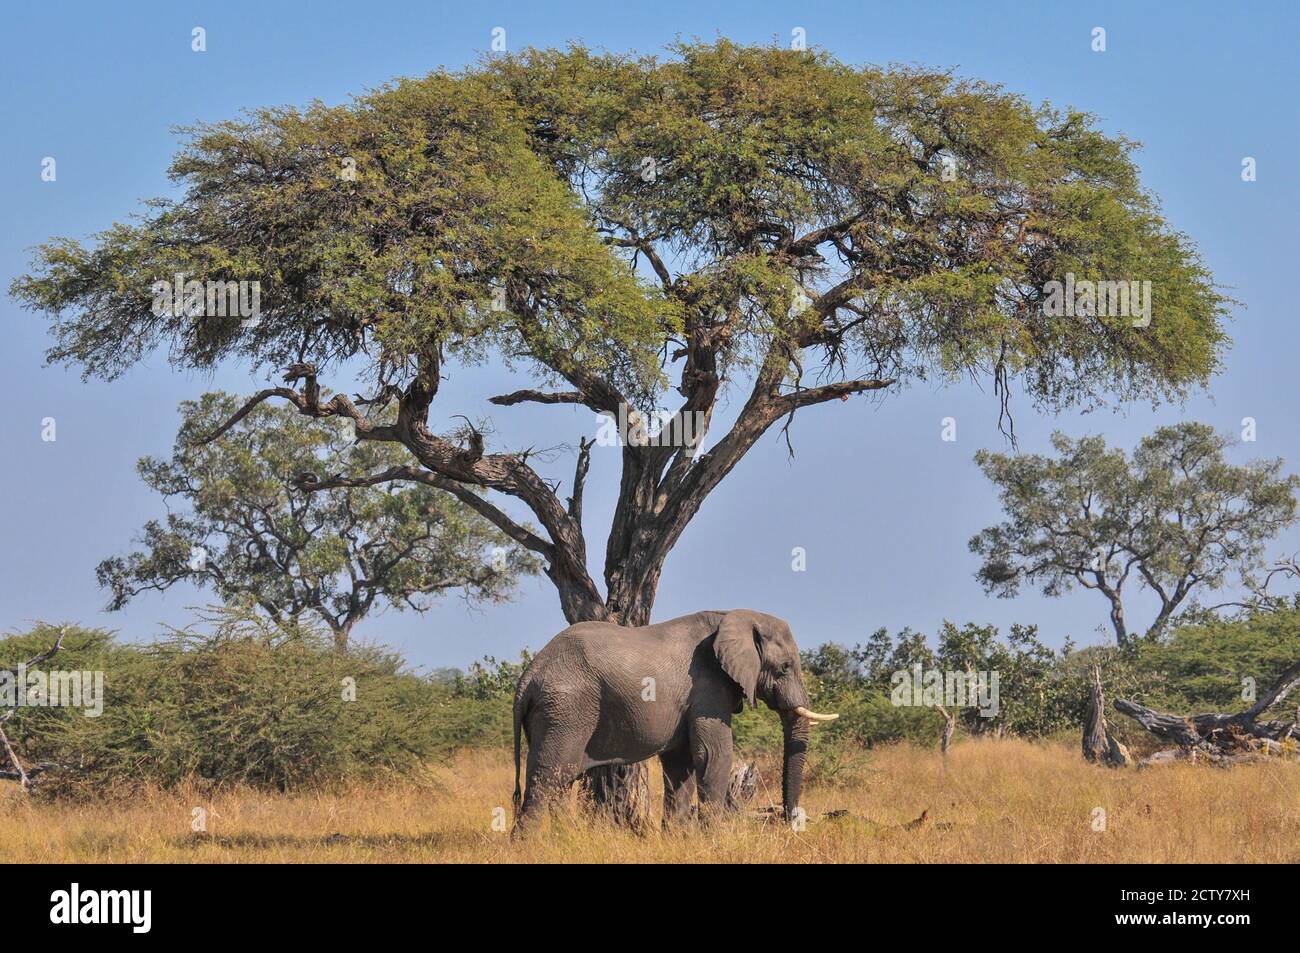 Large male elephant in the wild standing under a baobab tree in Botswana. South Africa. 2011 Stock Photo